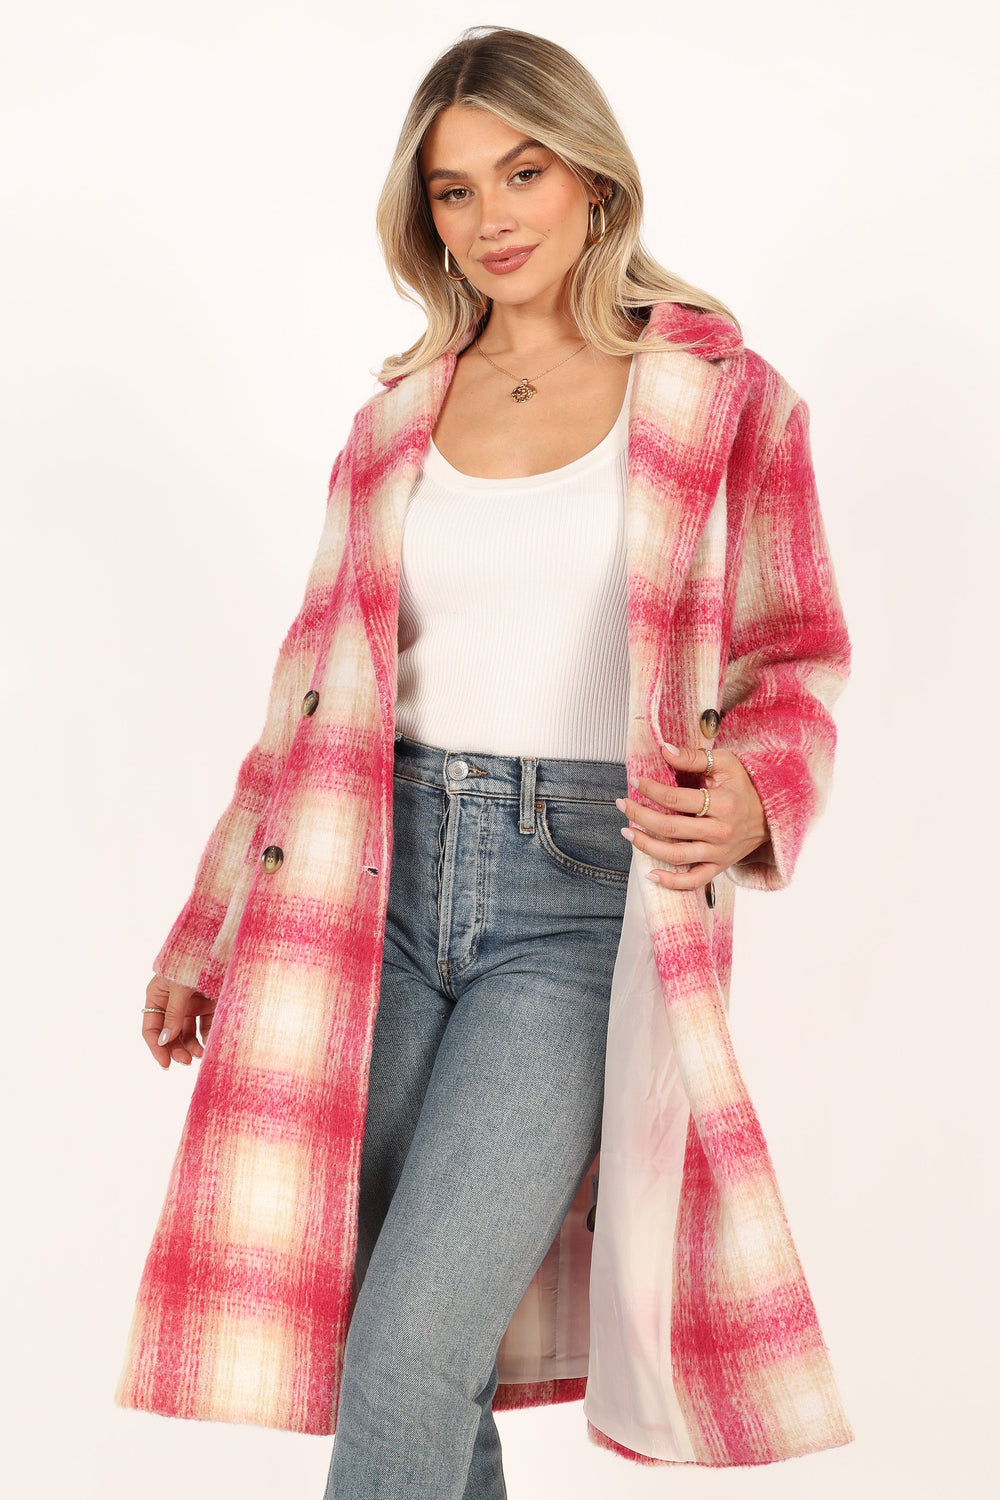 Petal and Pup USA OUTERWEAR Gianna Button Front Plaid Long Coat - Pink